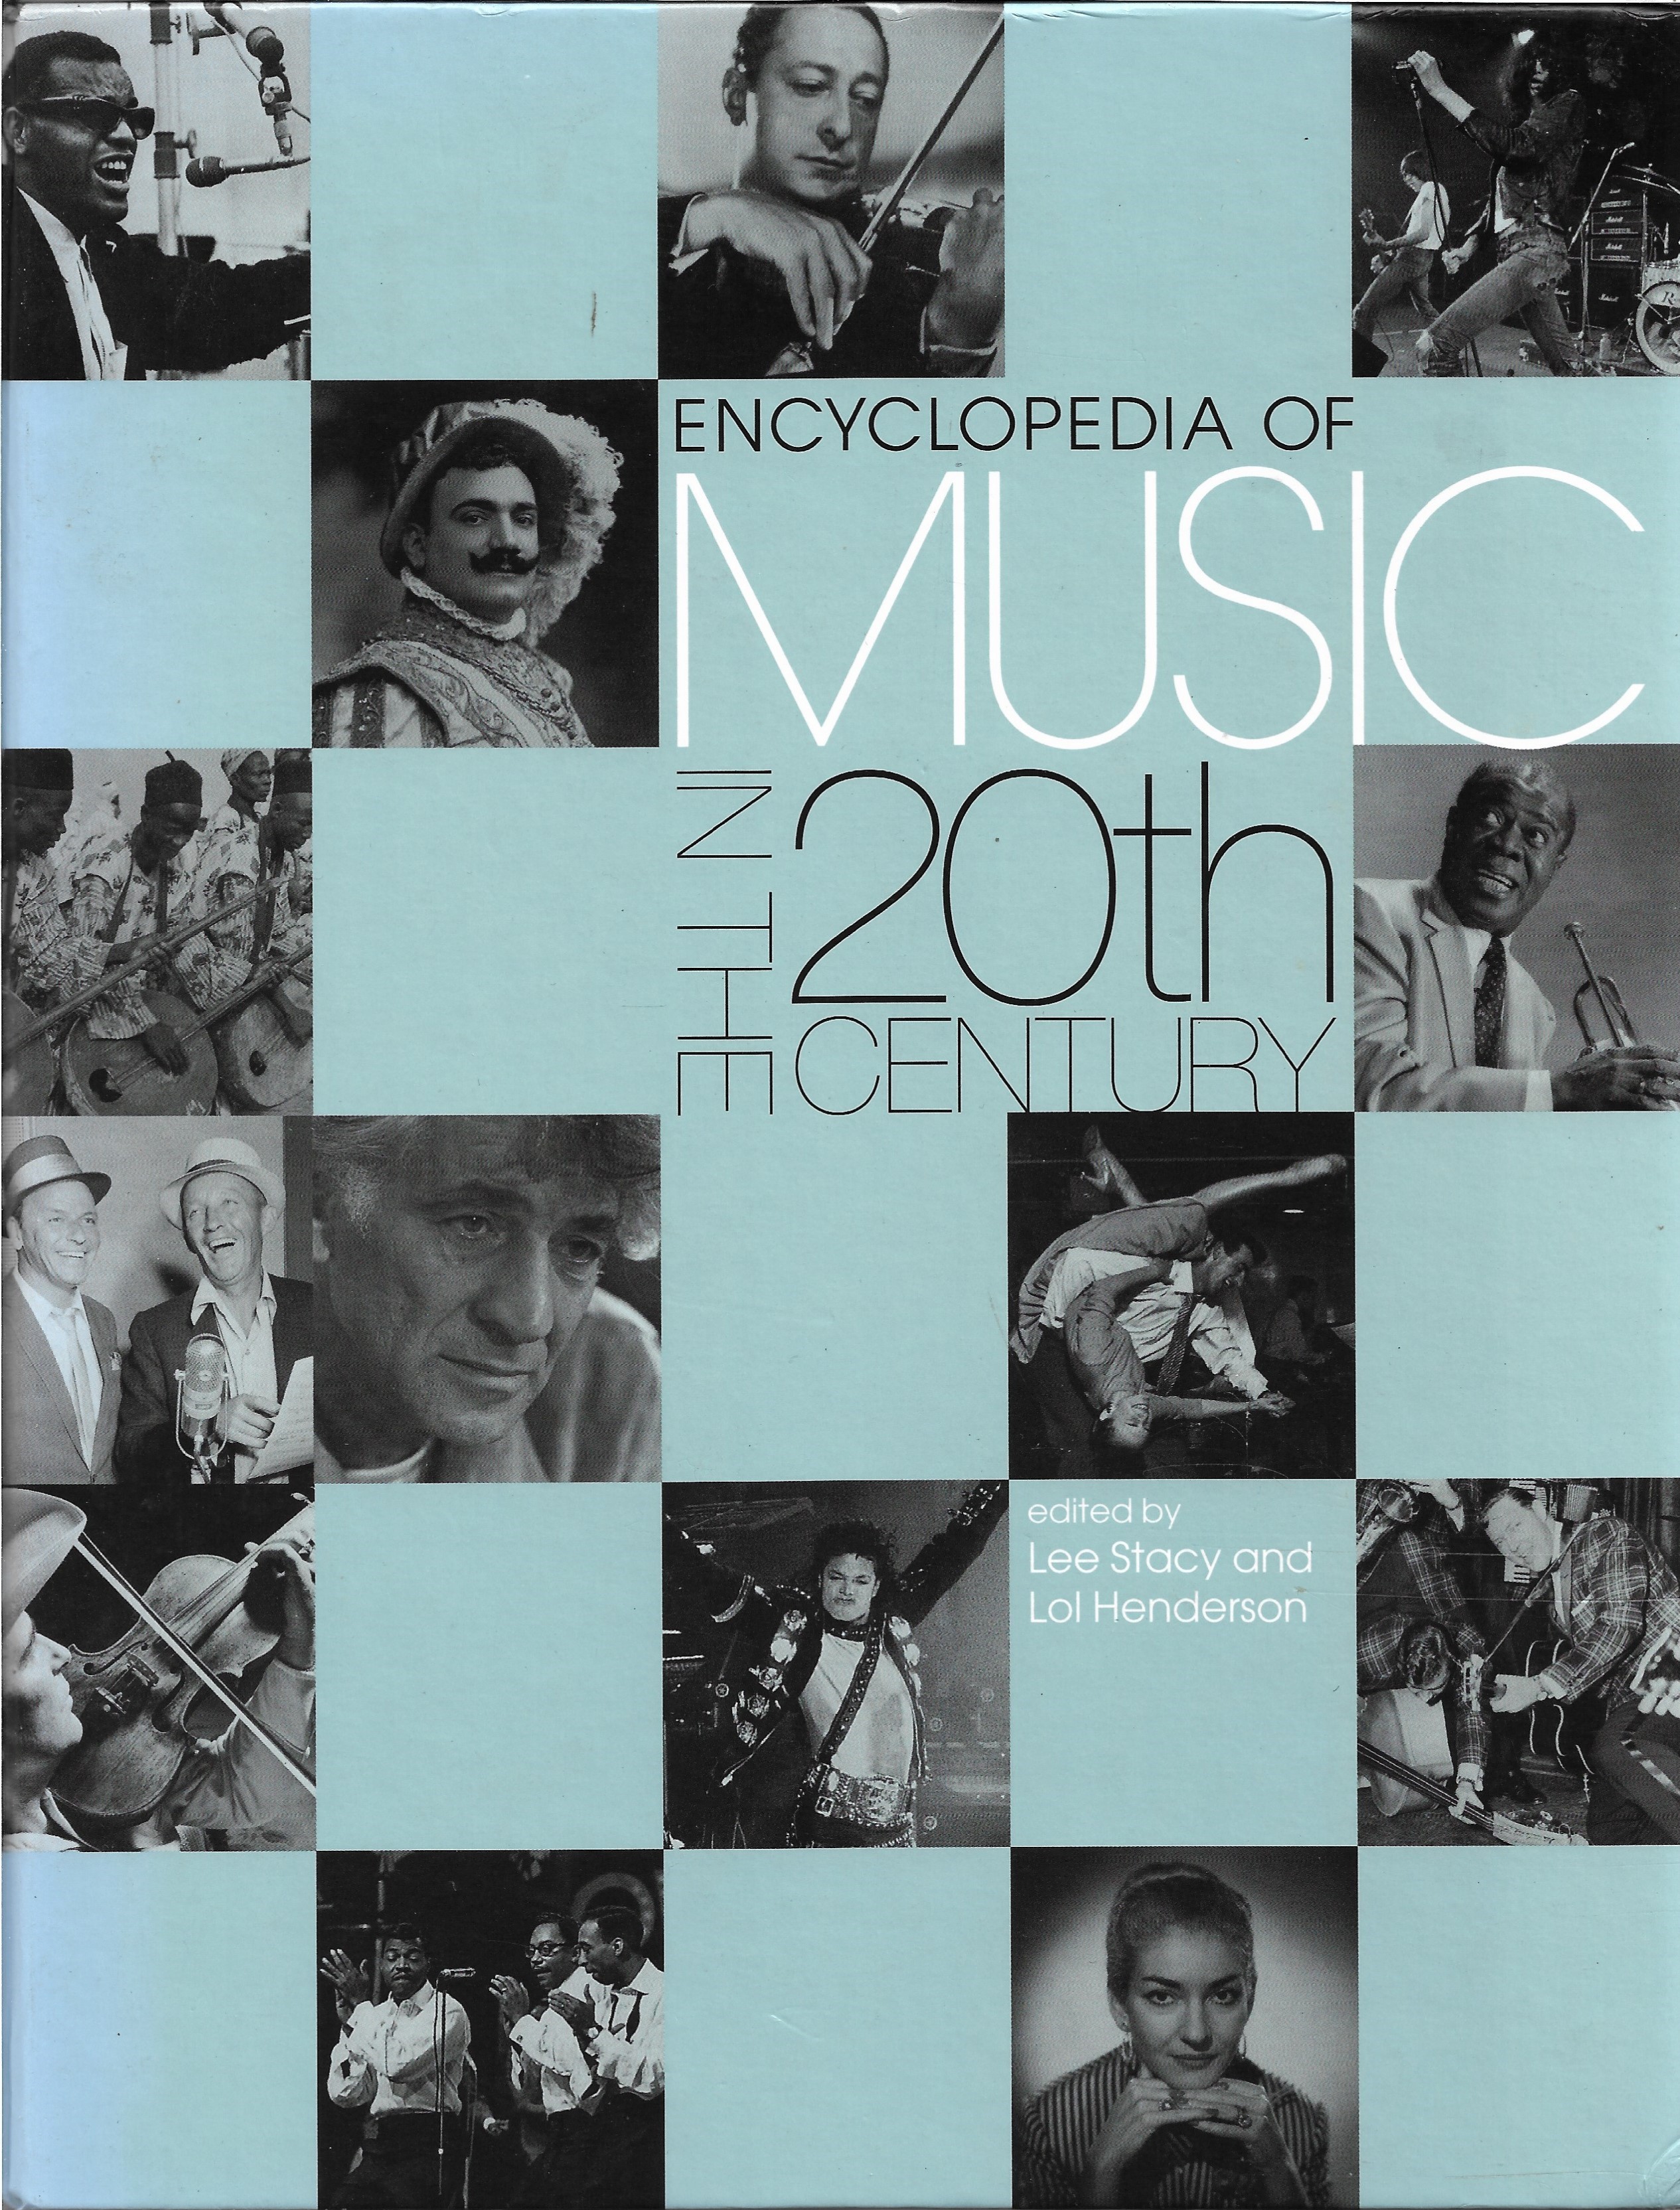 Encyclopedia of Music in the 20th Century - Henderson, Lol; Stacey, Lee, editors